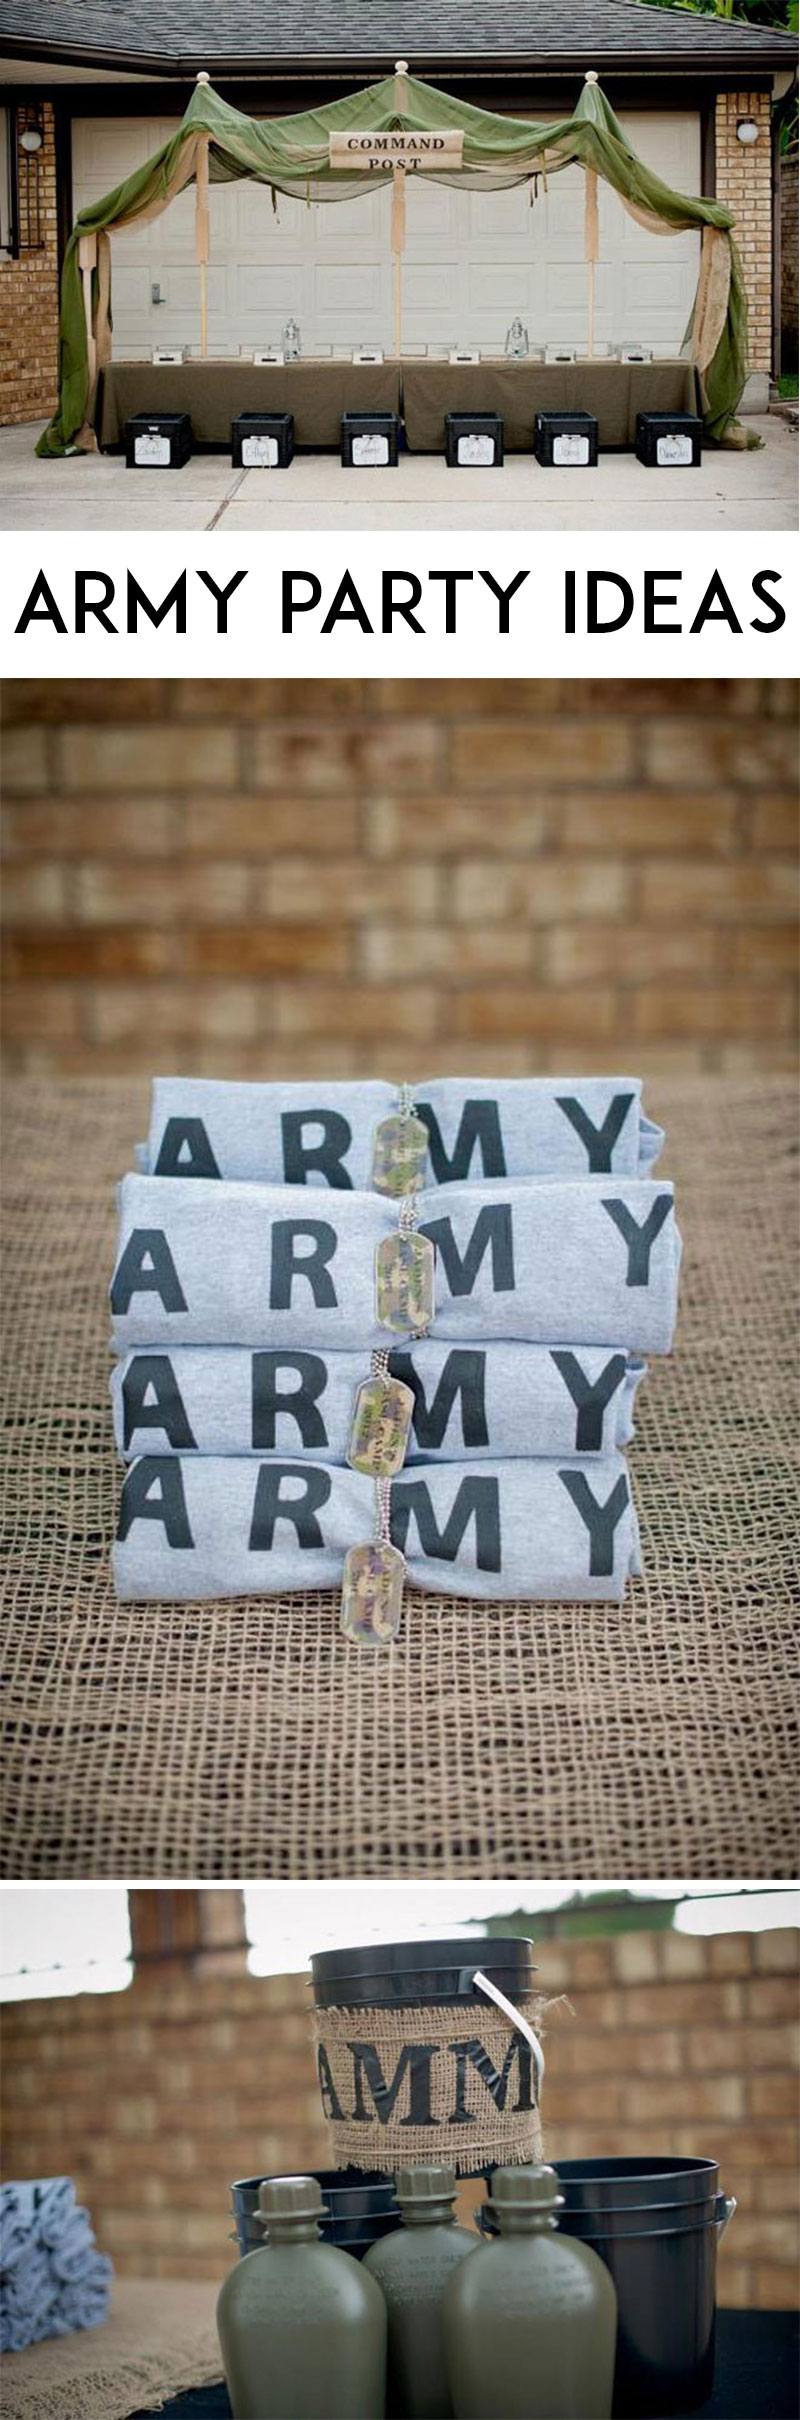 Army Party Ideas on Love The Day